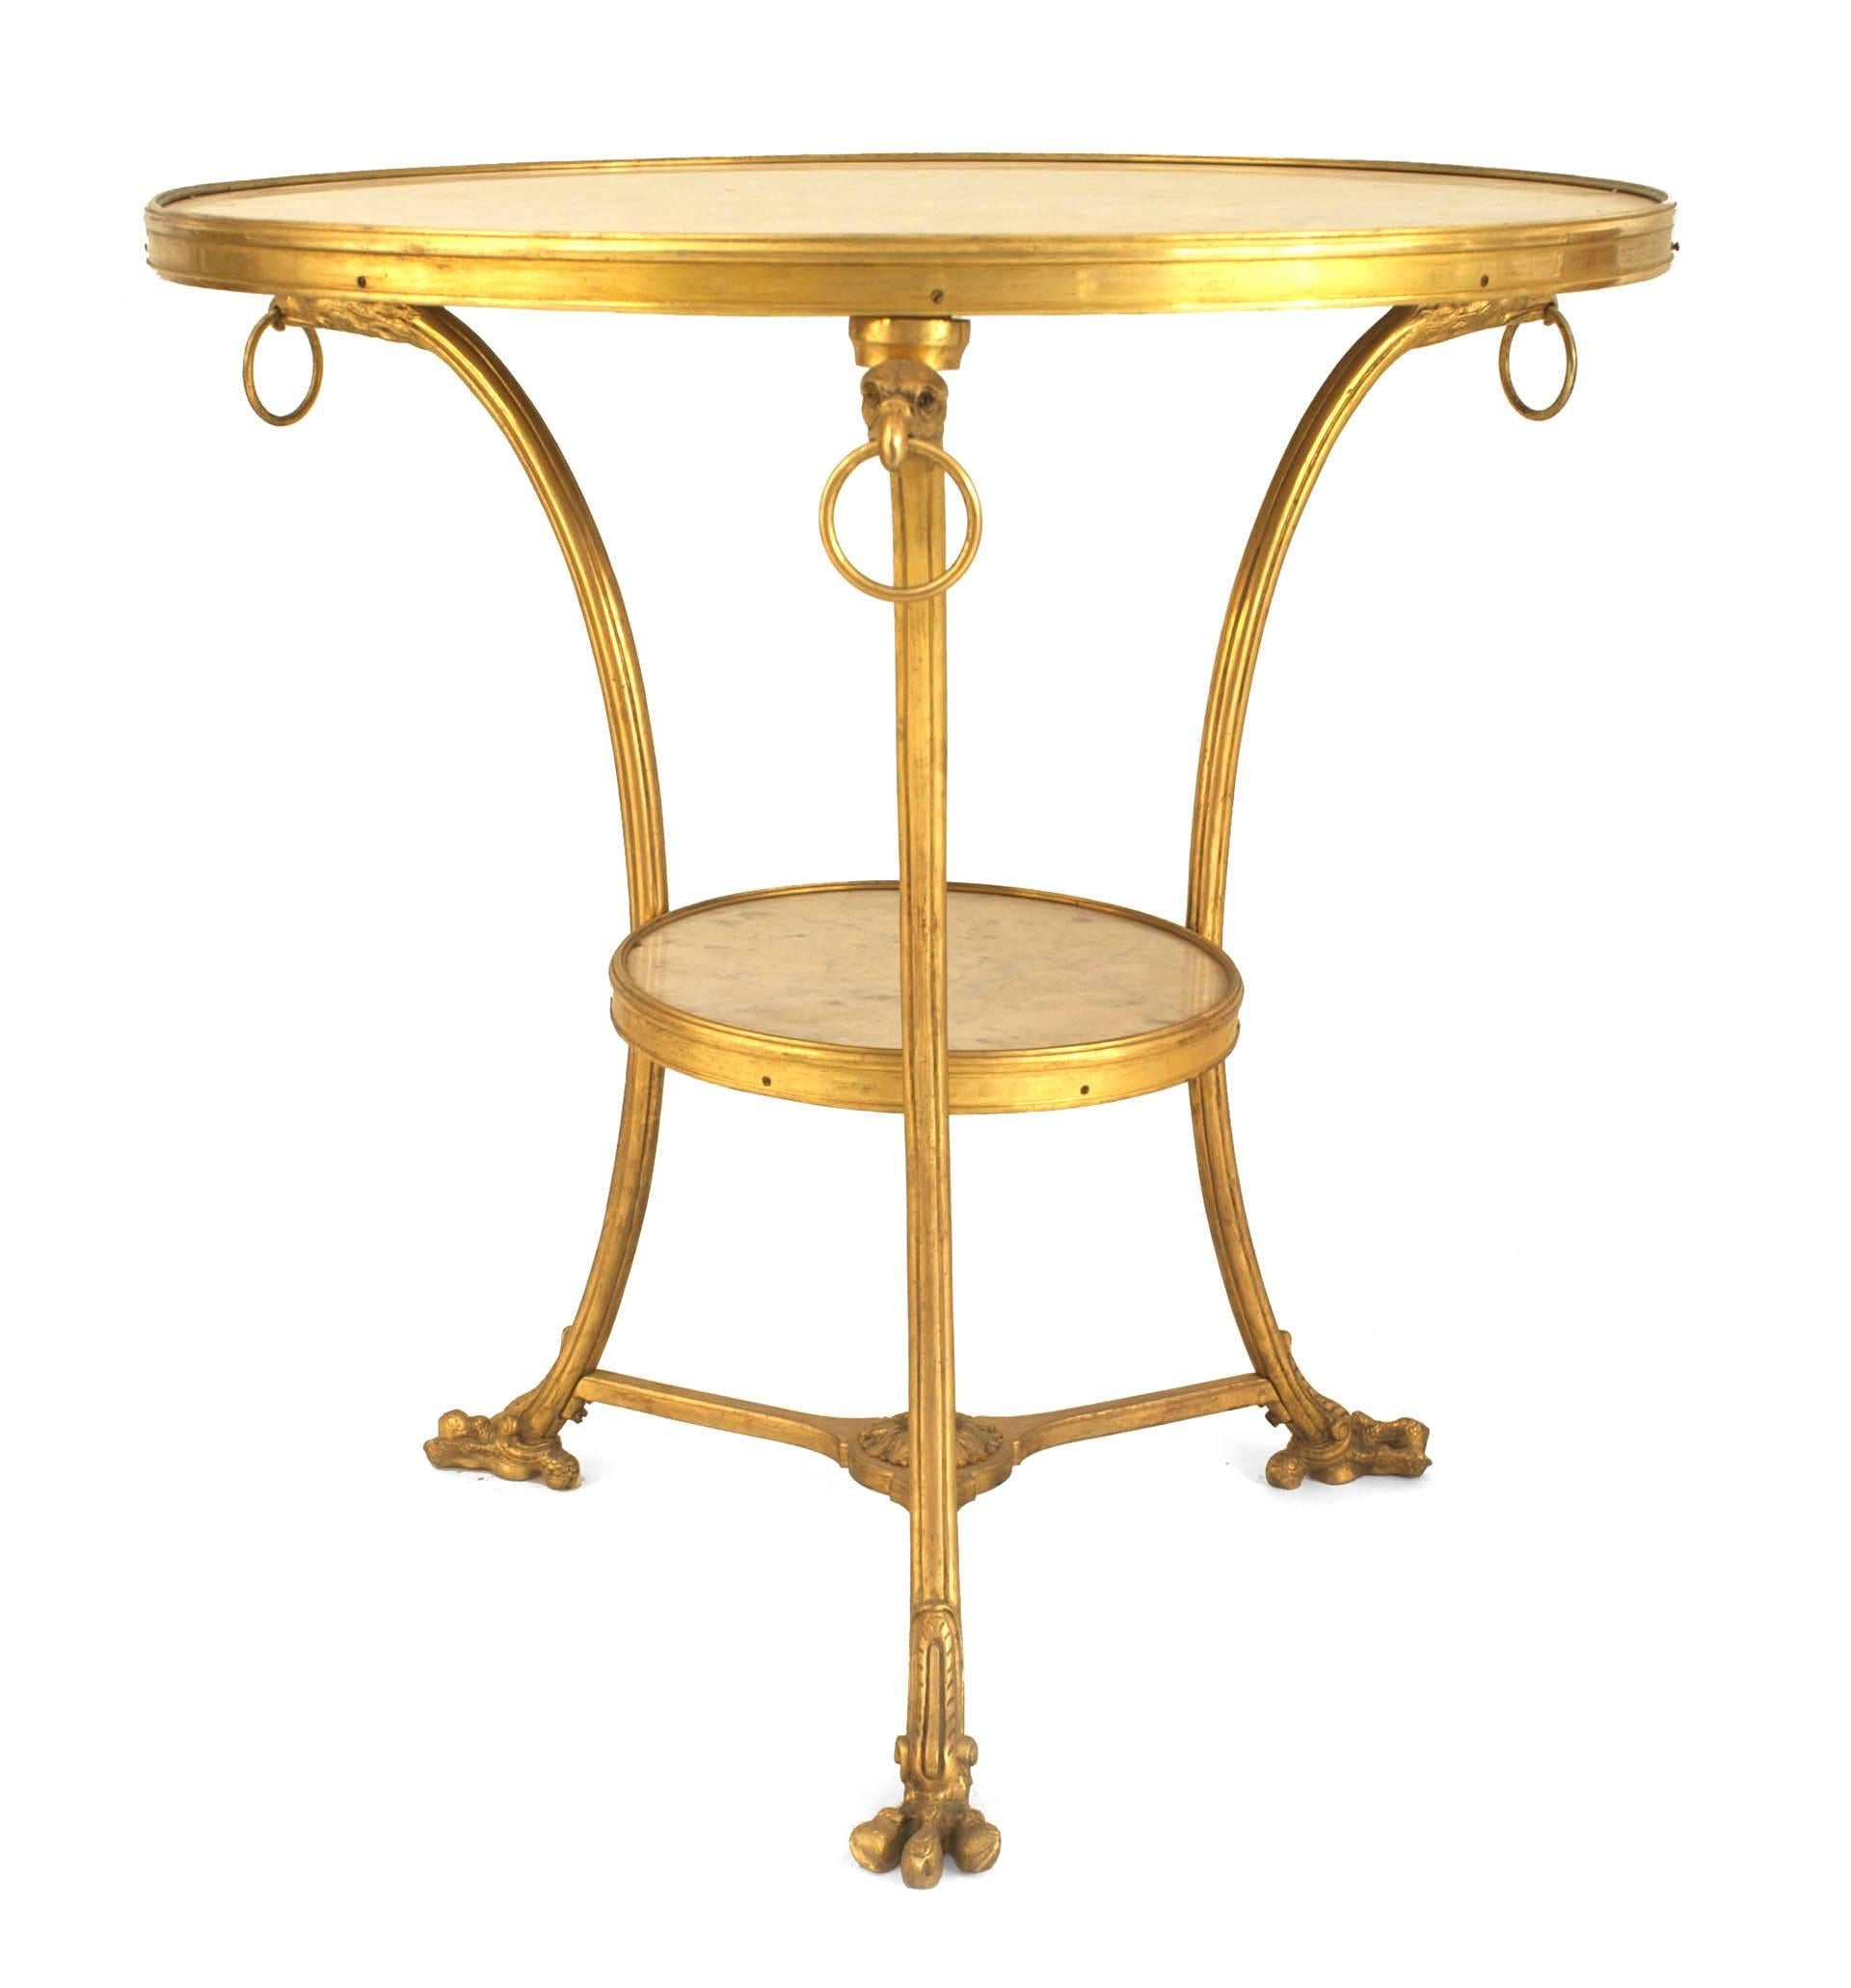 Two French Empire style bronze doré three legged round Gueridon end tables with eagle head design and white marble top and shelf (priced each).
  